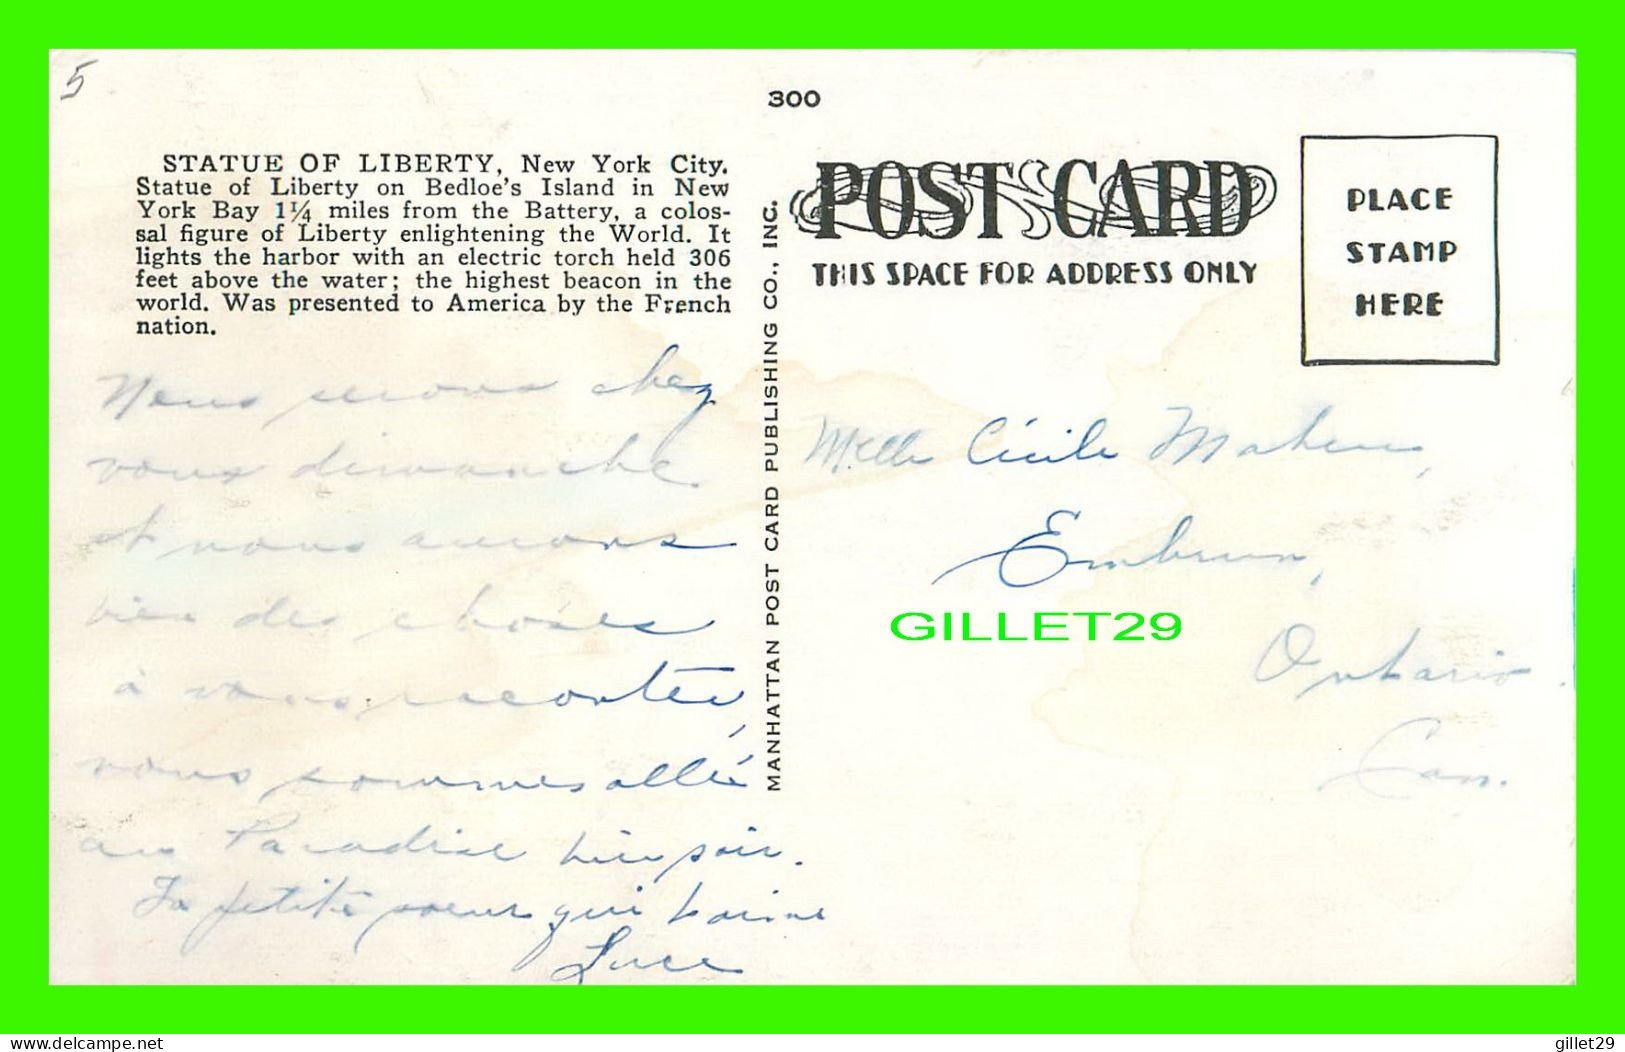 NEW YORK CITY, NY - STATUE OF LIBERTY WITH AIRSHIP - WRITTEN -  MANHATTAN POST CARD PUB. CO INC - - Freiheitsstatue